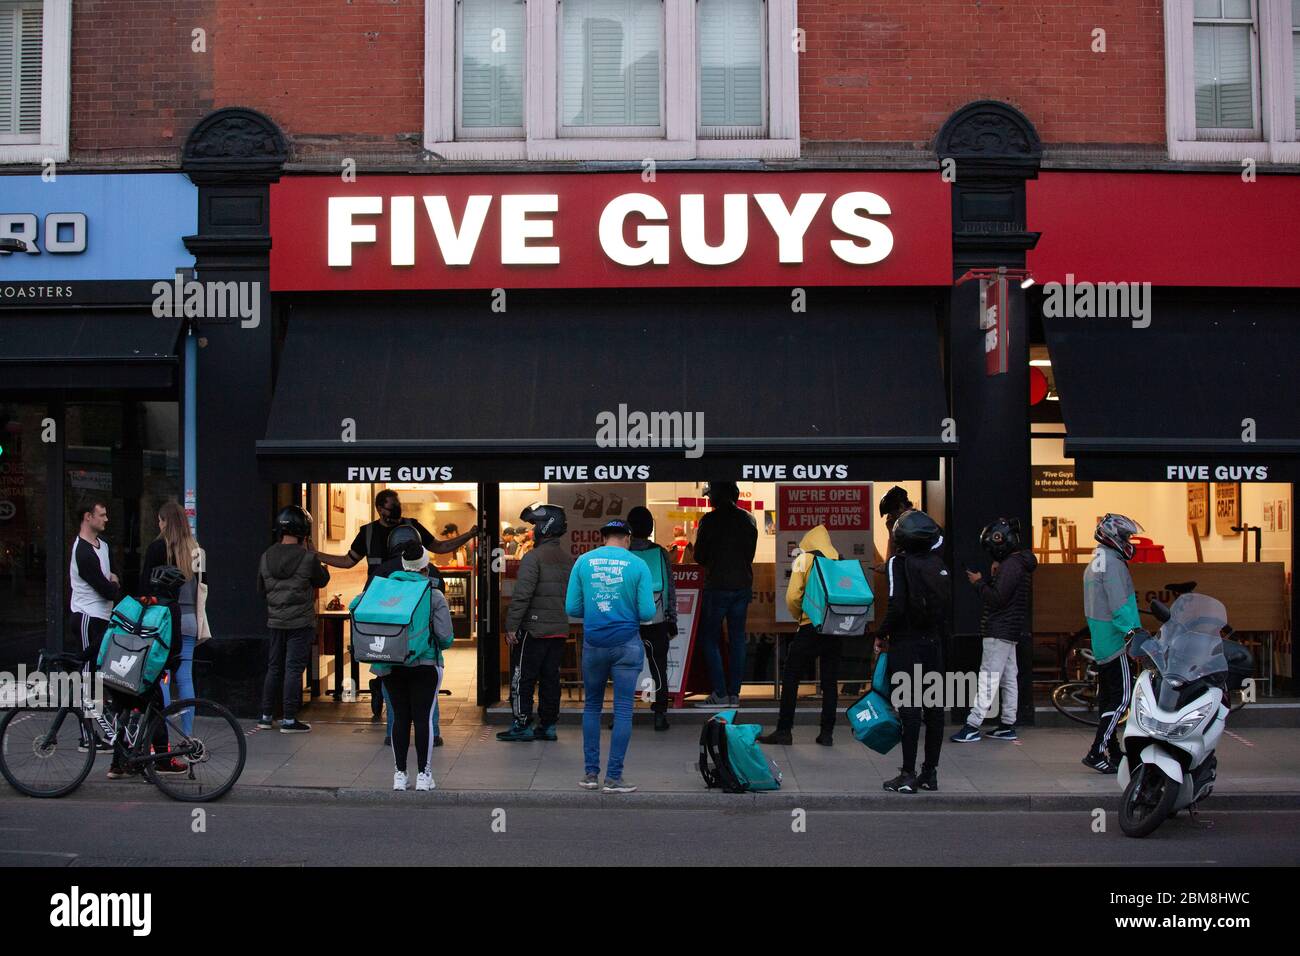 London, UK, 7 May 2020: on Clapham High Street, at a branch of Five Guys burger chain, many delivery riders and customers collecting online orders gather outside and social distancing rules are not strictly met. Anna Watson/Alamy Live News Stock Photo